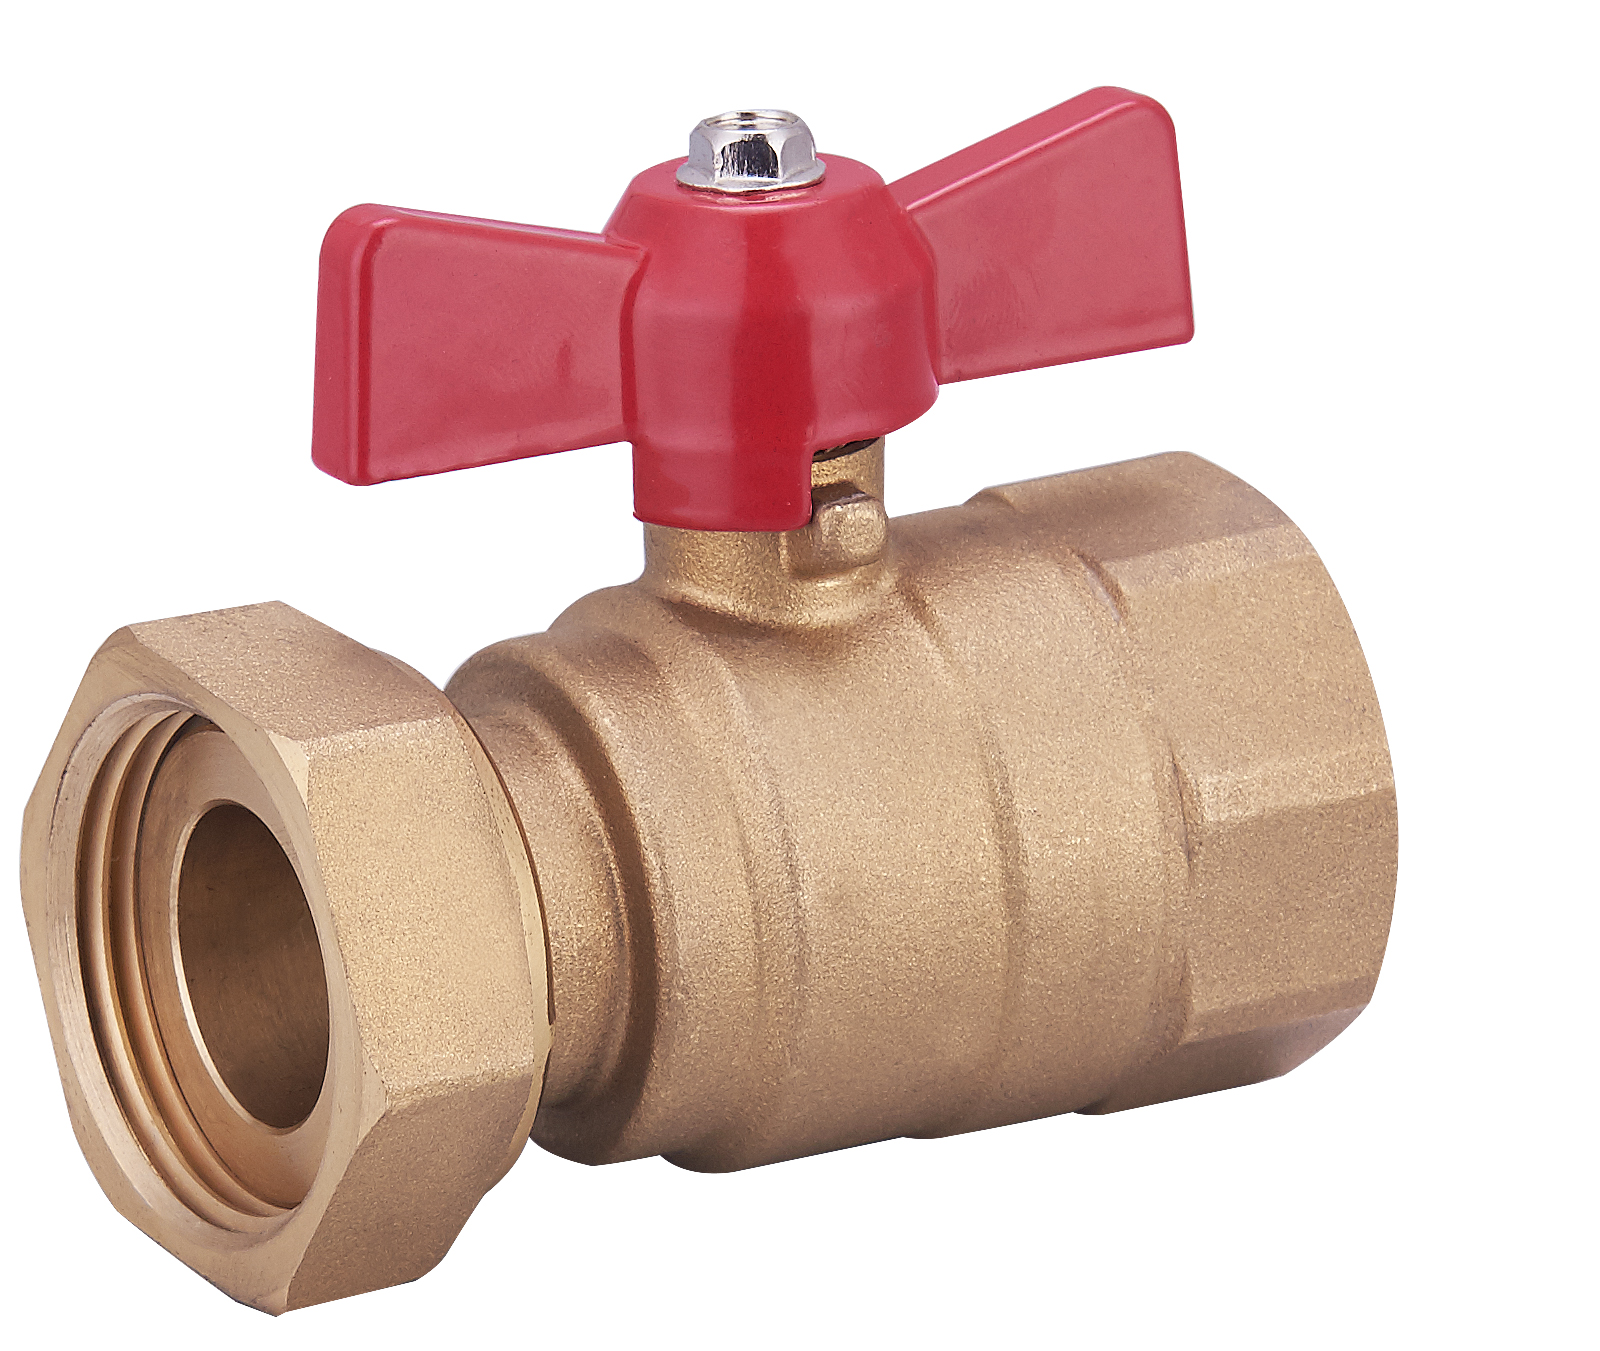 ZS200-1036: Ball Valve With Union 